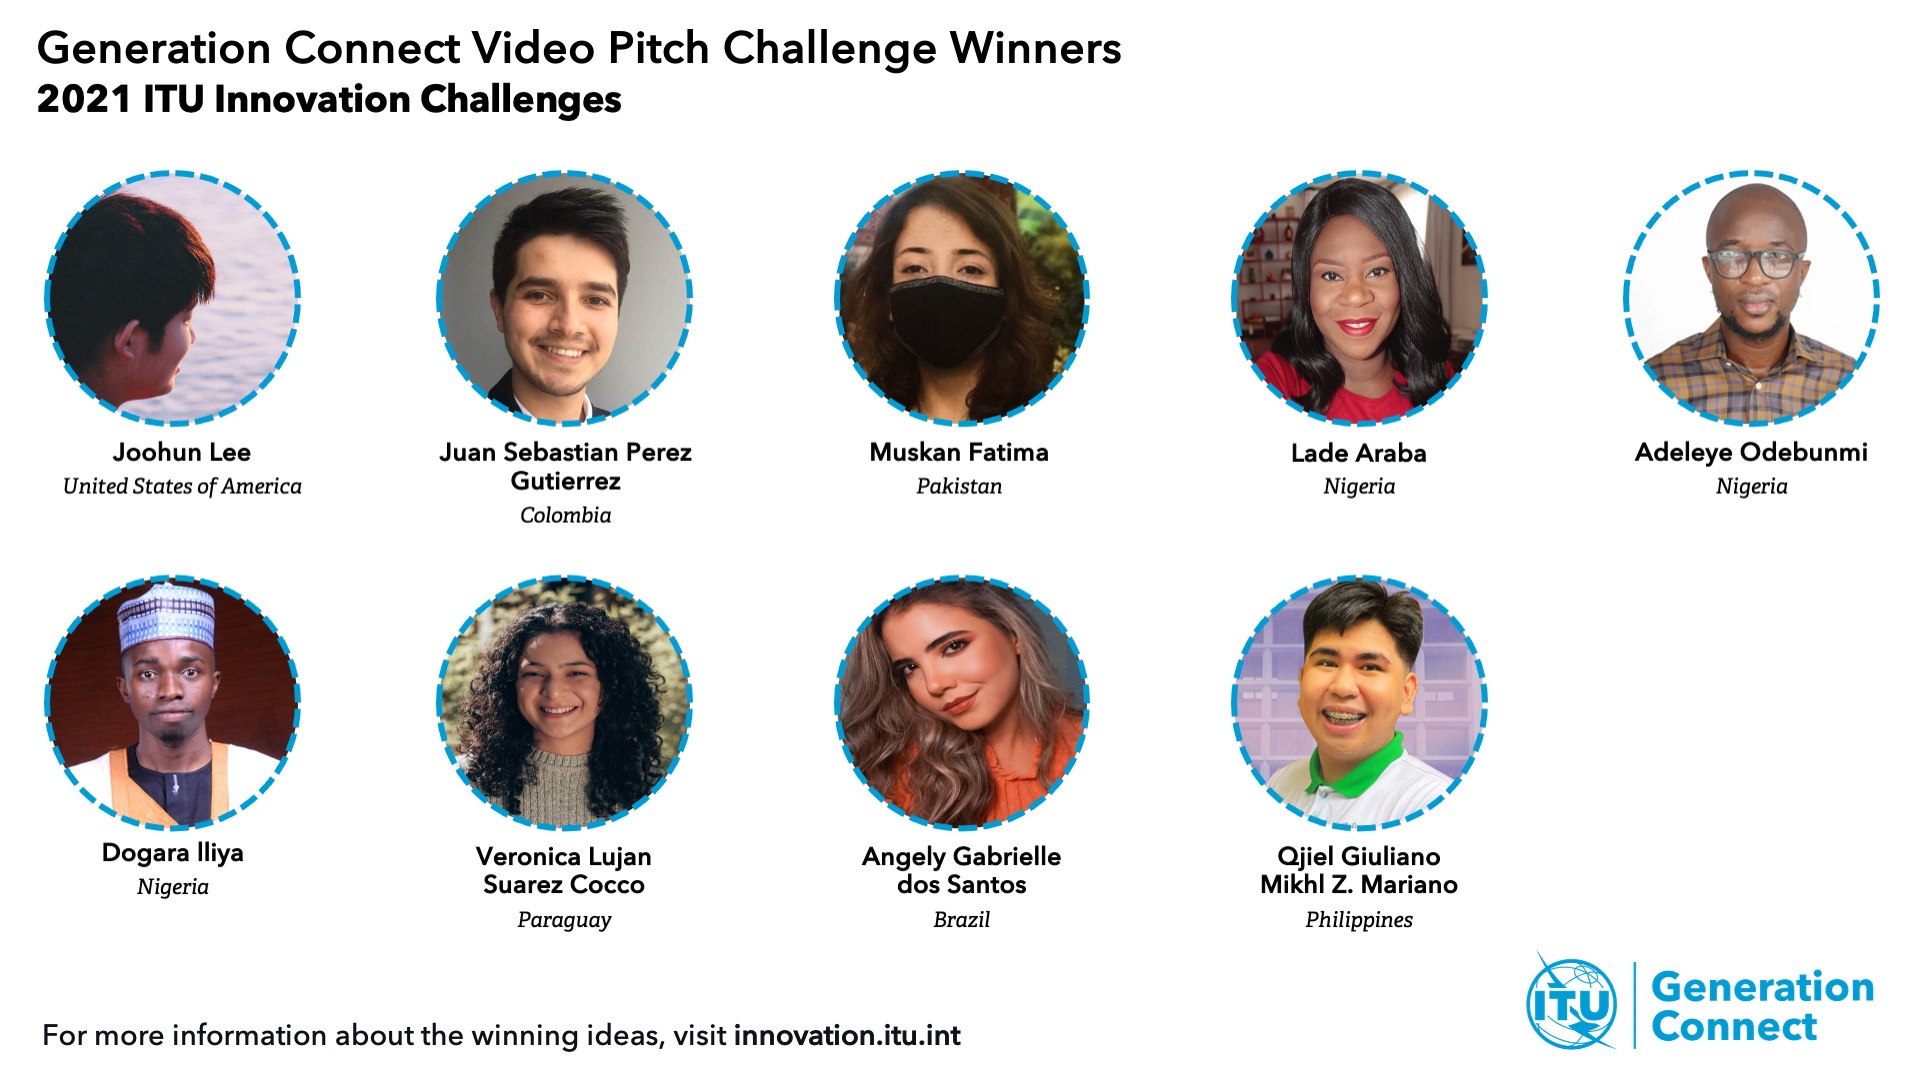 2021 ITU Innovation Challenges: Generation Connect Video Pitch Challenge Winners